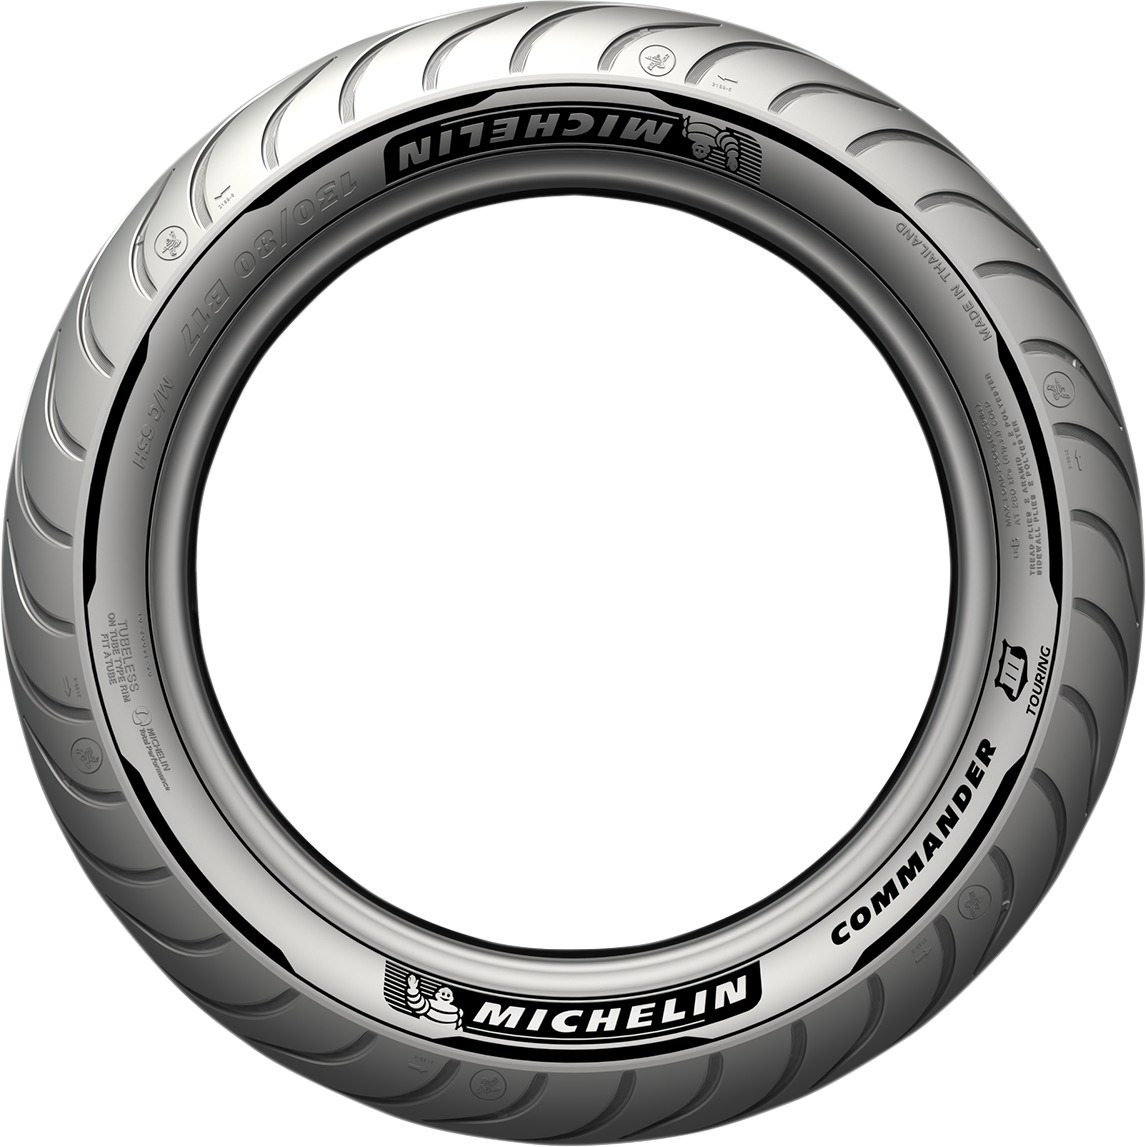 120/70B21 68H Reinforced Commander III Front Touring Tire - TL/TT - Click Image to Close